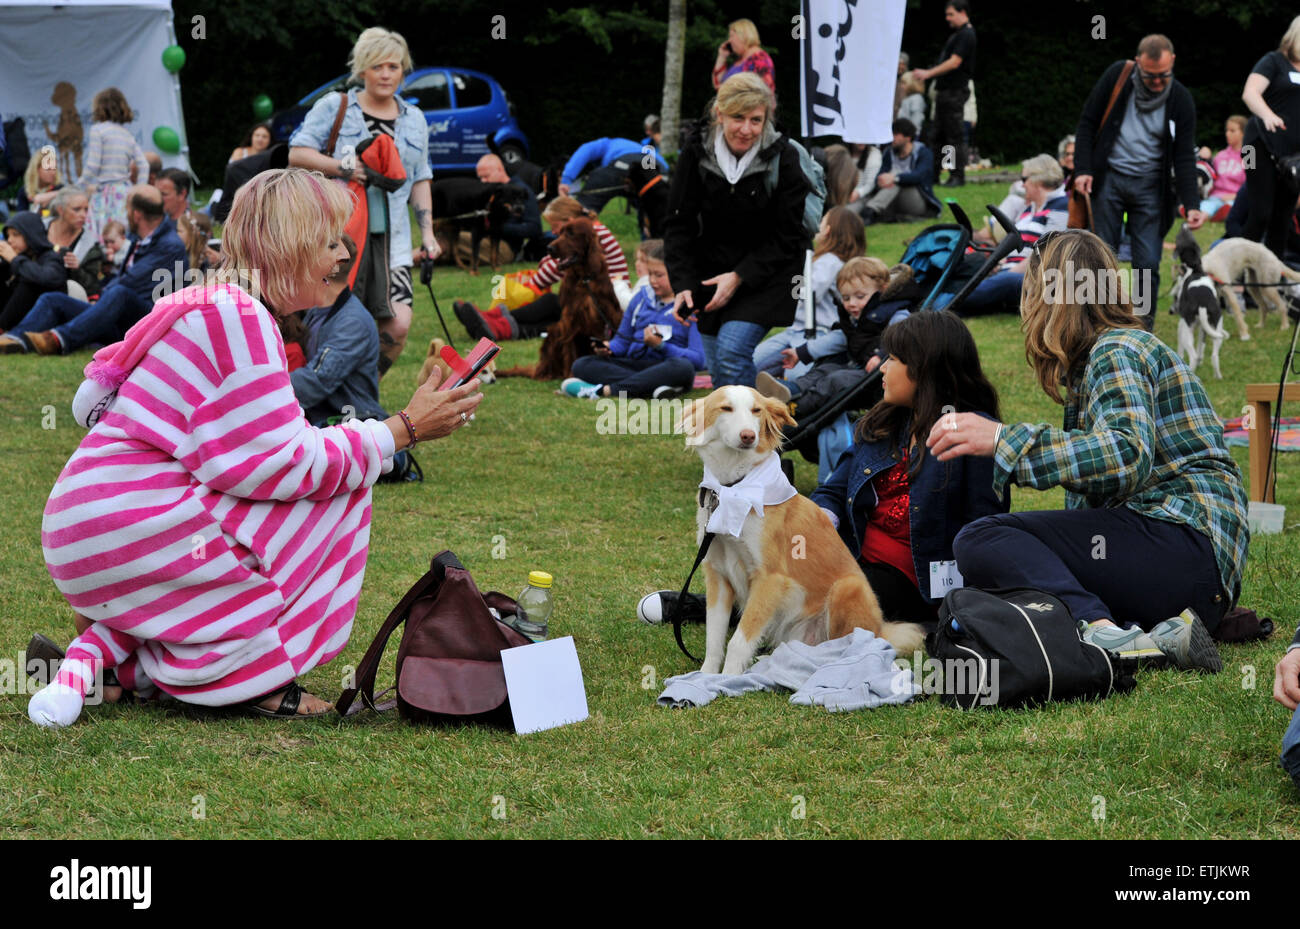 Brighton, UK. 14th June, 2015. Time to pose for a photograph at the annual Bark in the Park Dog Show held at Queens Park in Brighton Stock Photo